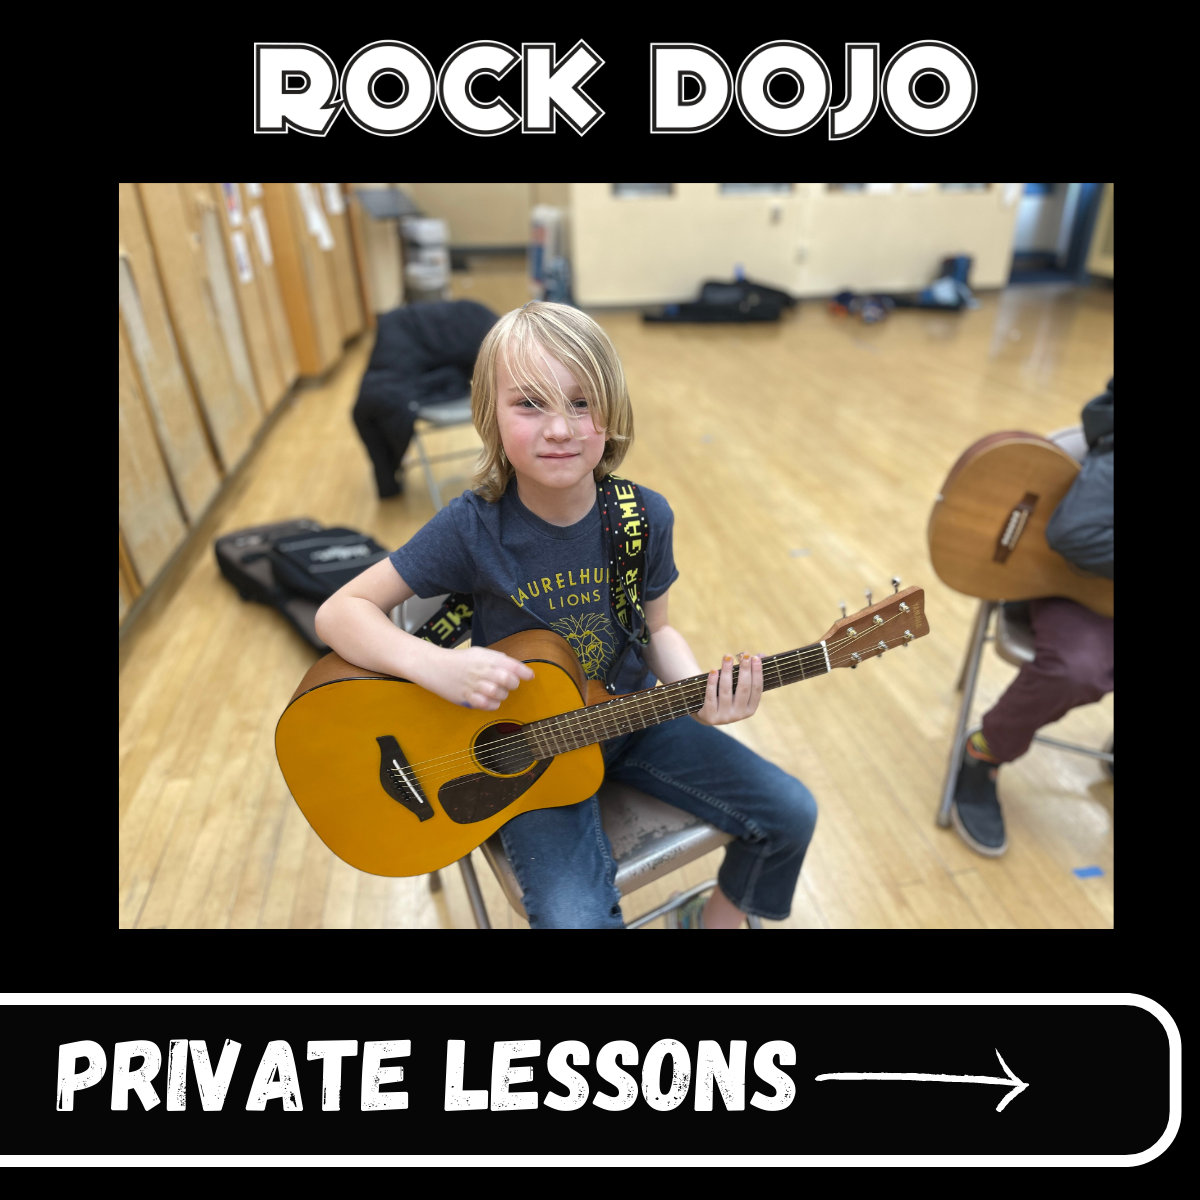 Rock Dojo online private guitar lessons provide kids with a great opportunity to learn to play the guitar.